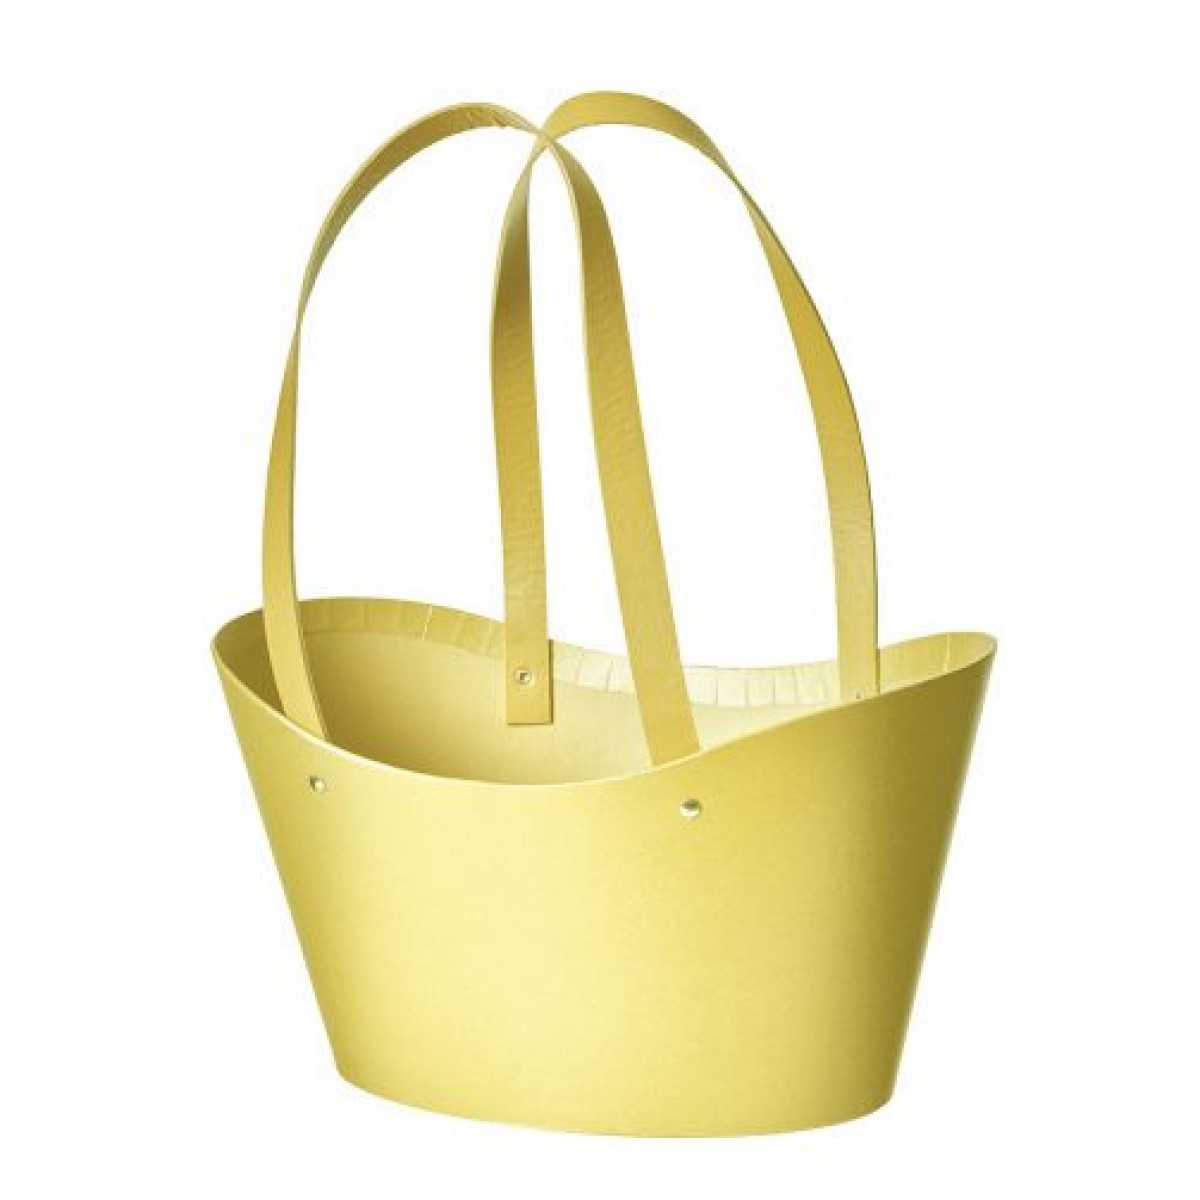 5061 Napier Basket Paper Lined Yellow (Pack of 12)